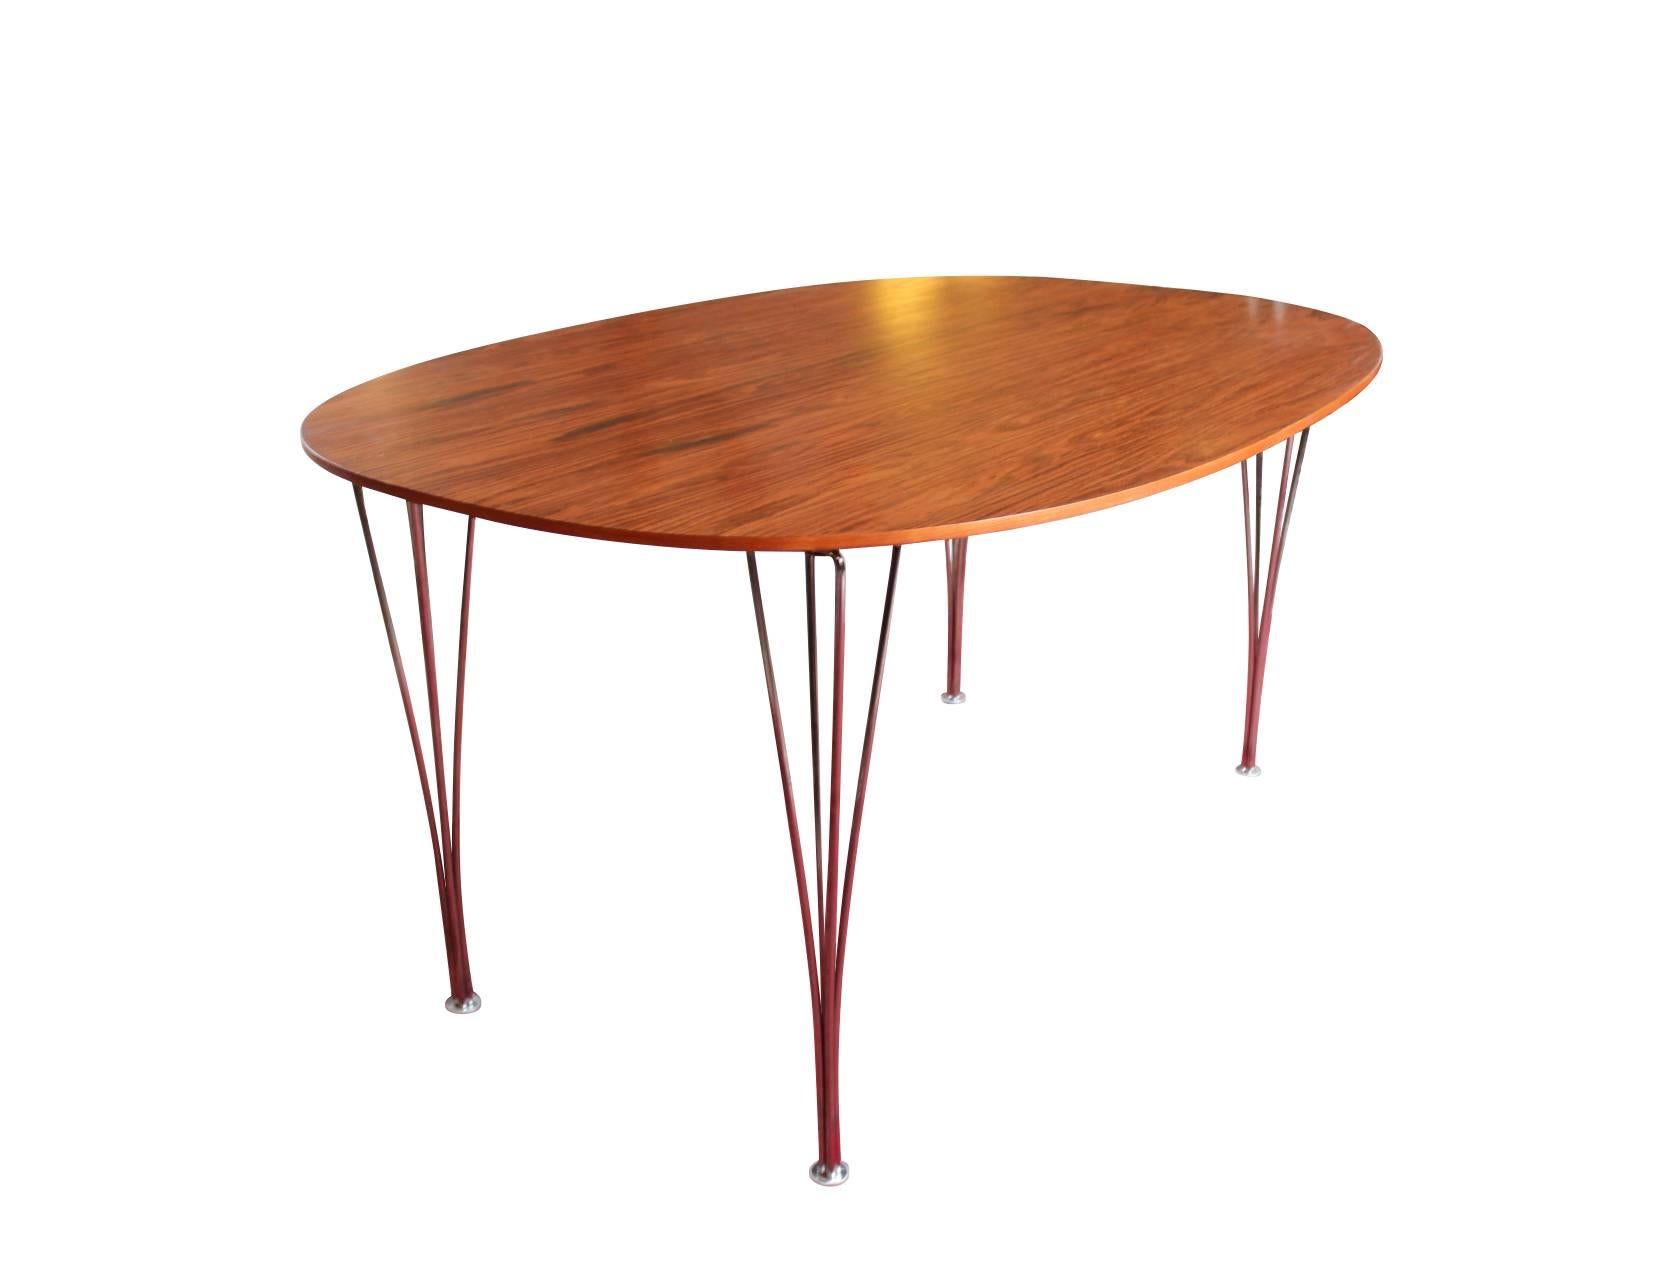 Super Ellipse dining table in rosewood designed by Piet Hein and Bruno Mathsson in 1968 and manufactured by Fritz Hansen in the 1980s. The legs are of chromium-plated steel.